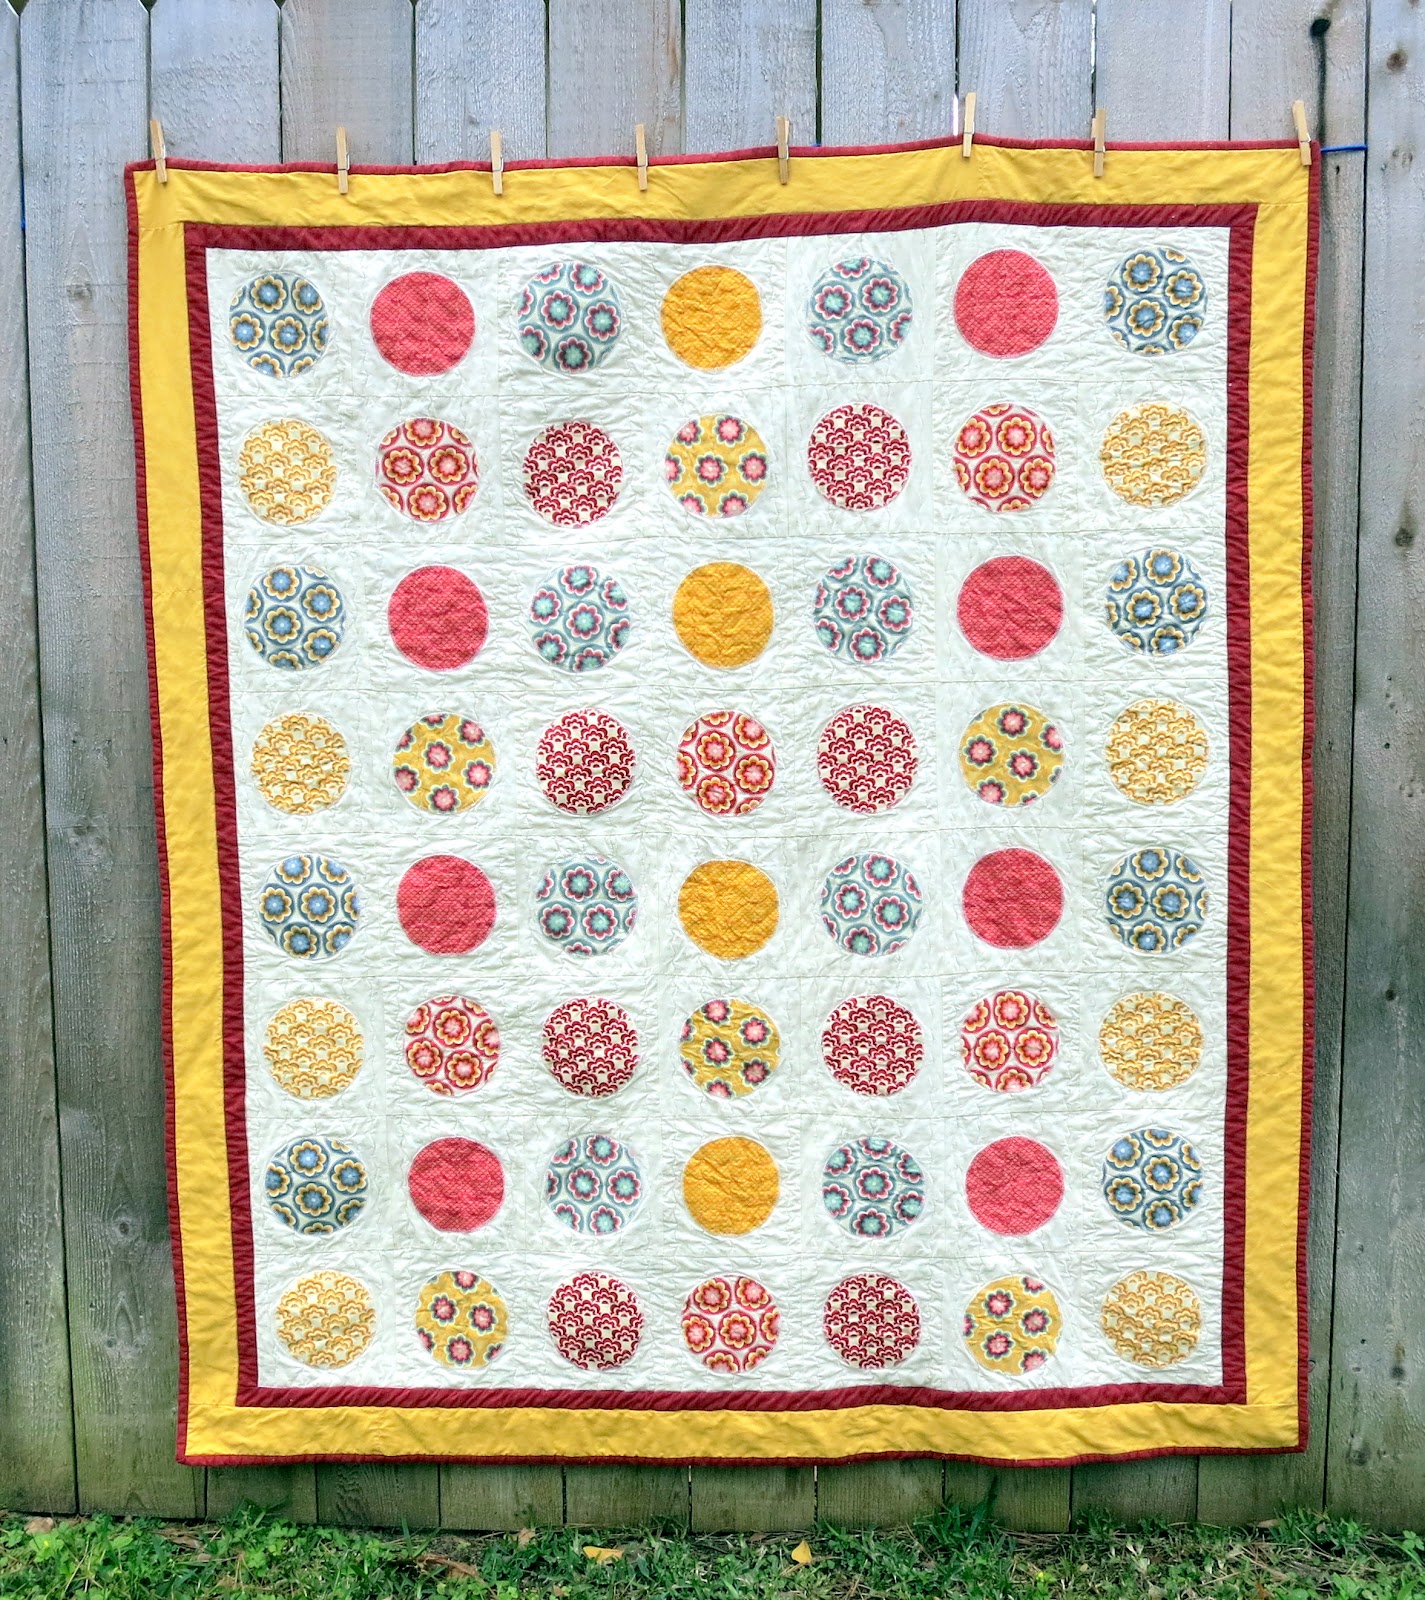 will-it-go-round-in-circles-free-quilt-pattern-and-tutorial-part-1